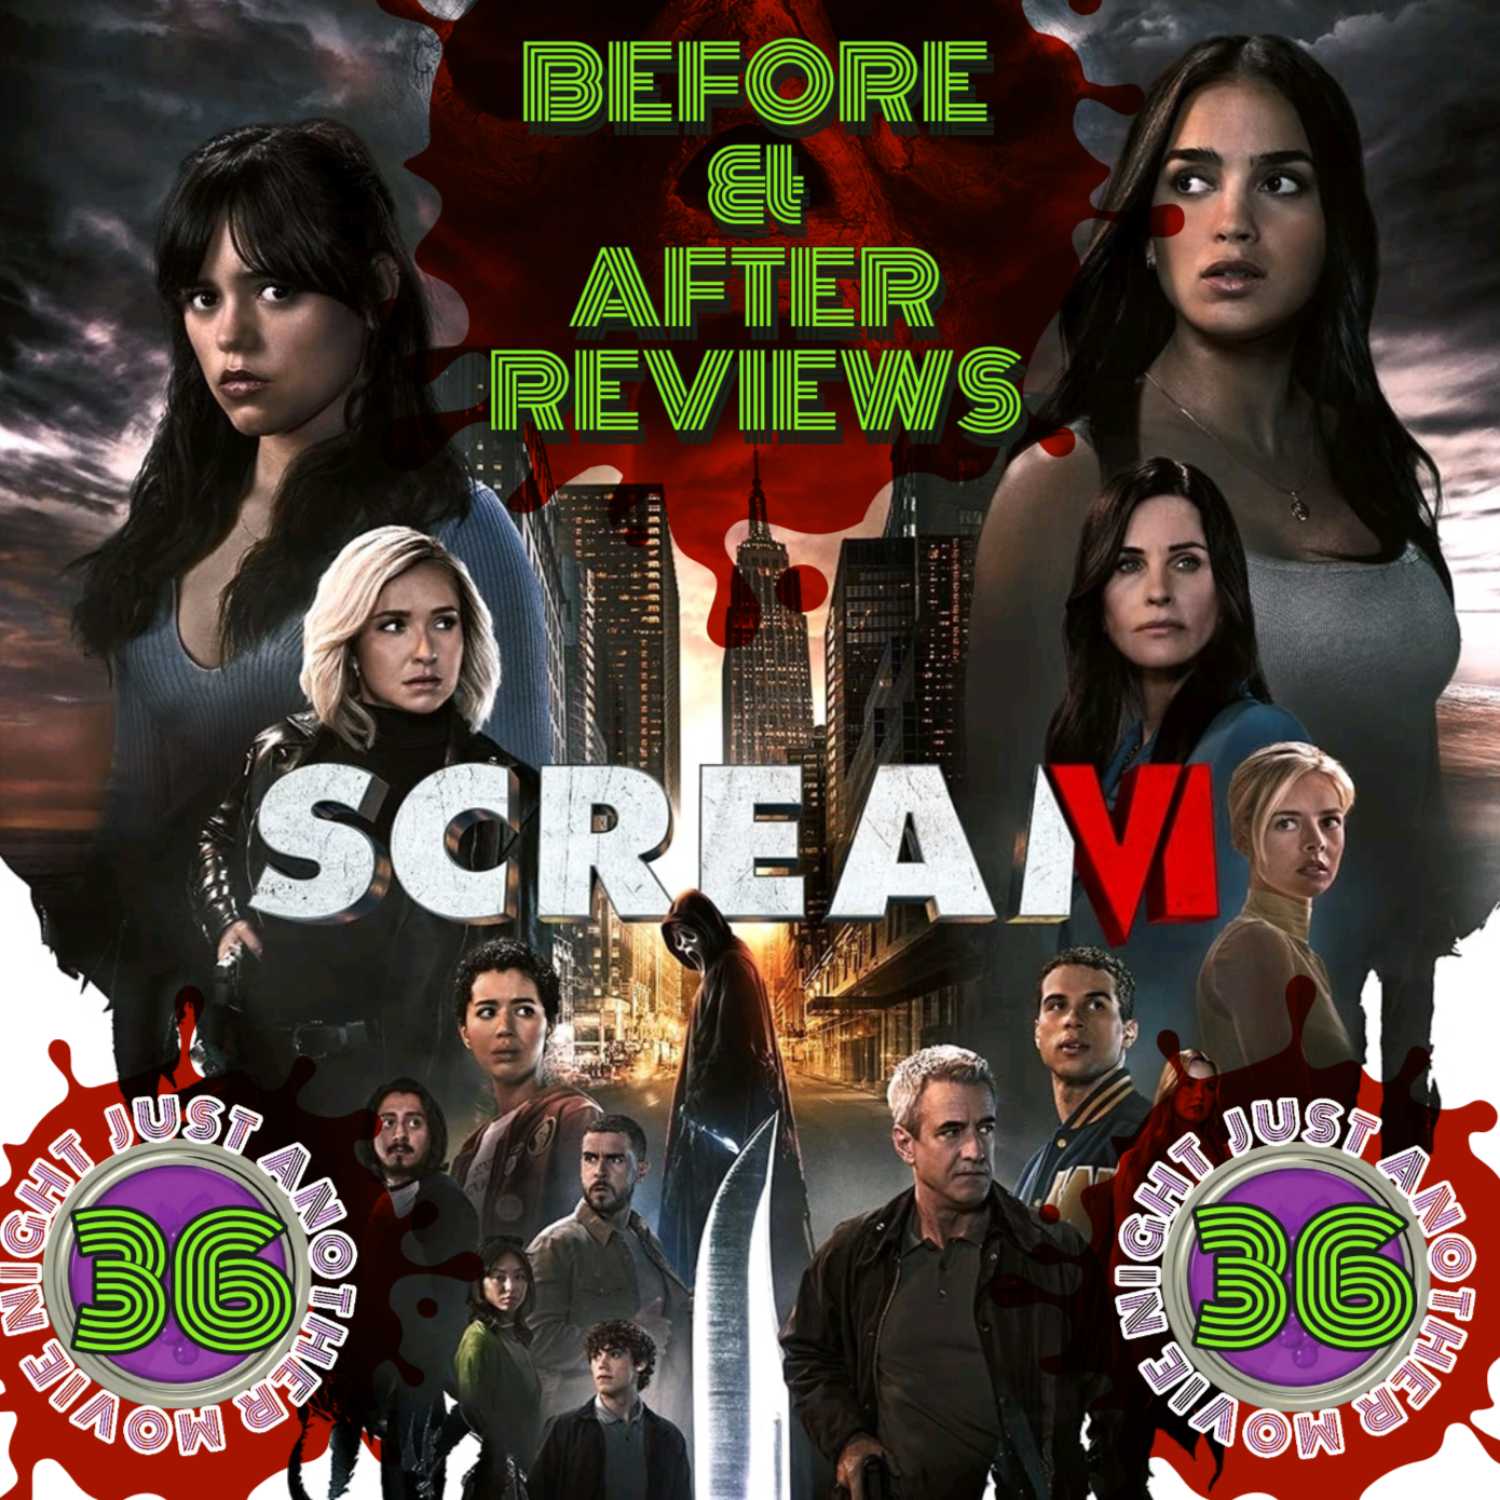 Before and After reviews episode 36 : Scream 6